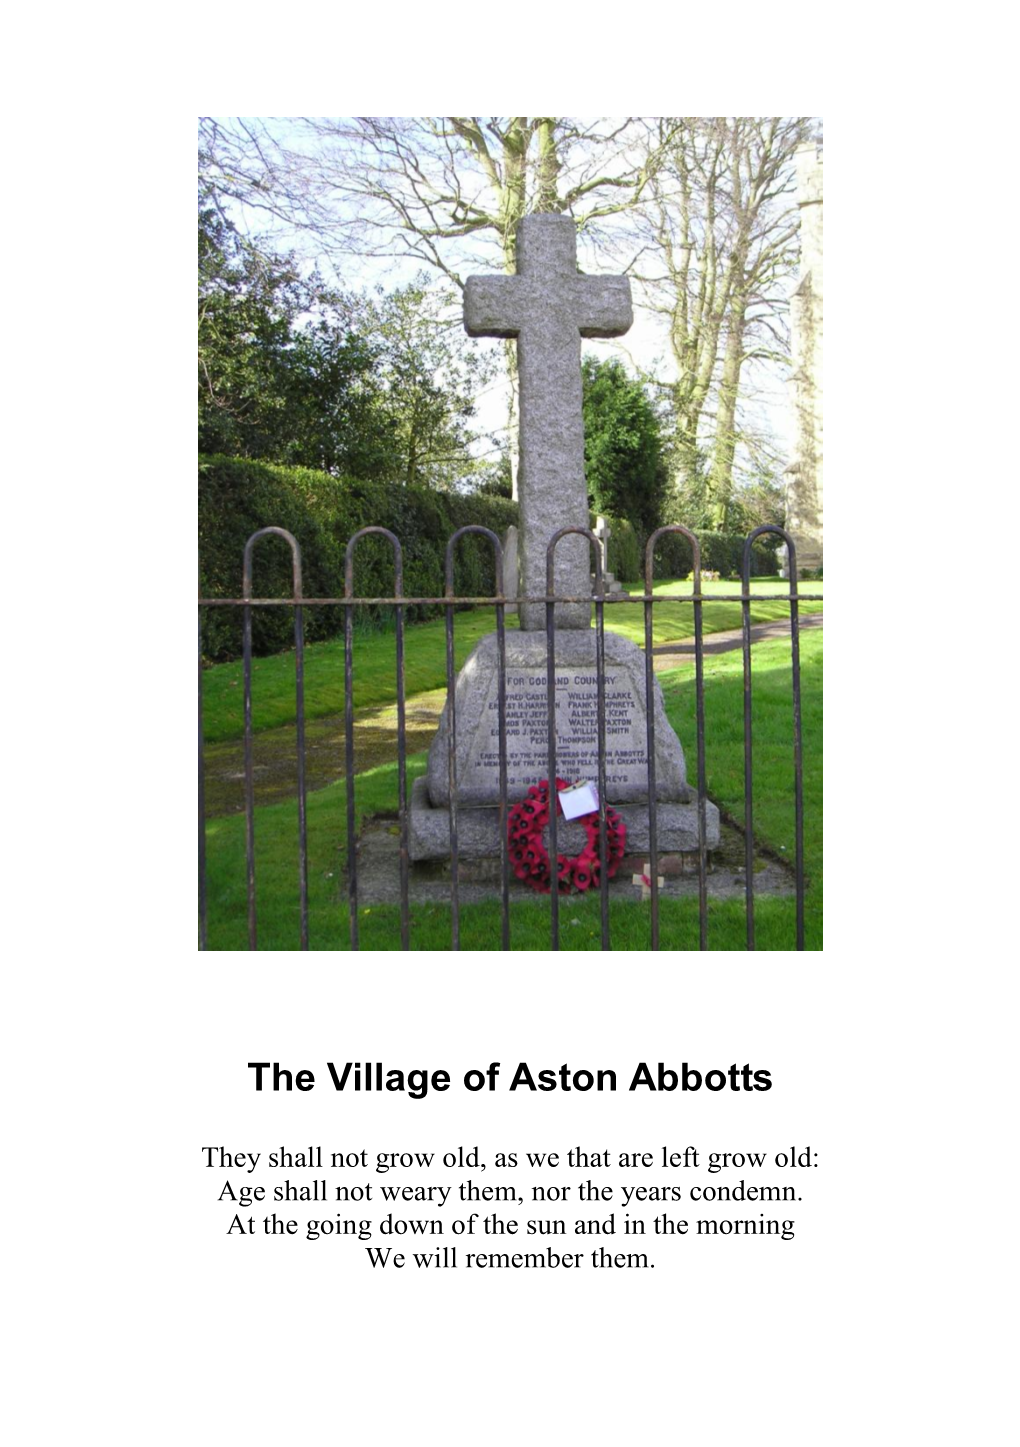 The Soldier Lads of Aston Abbotts Introduction